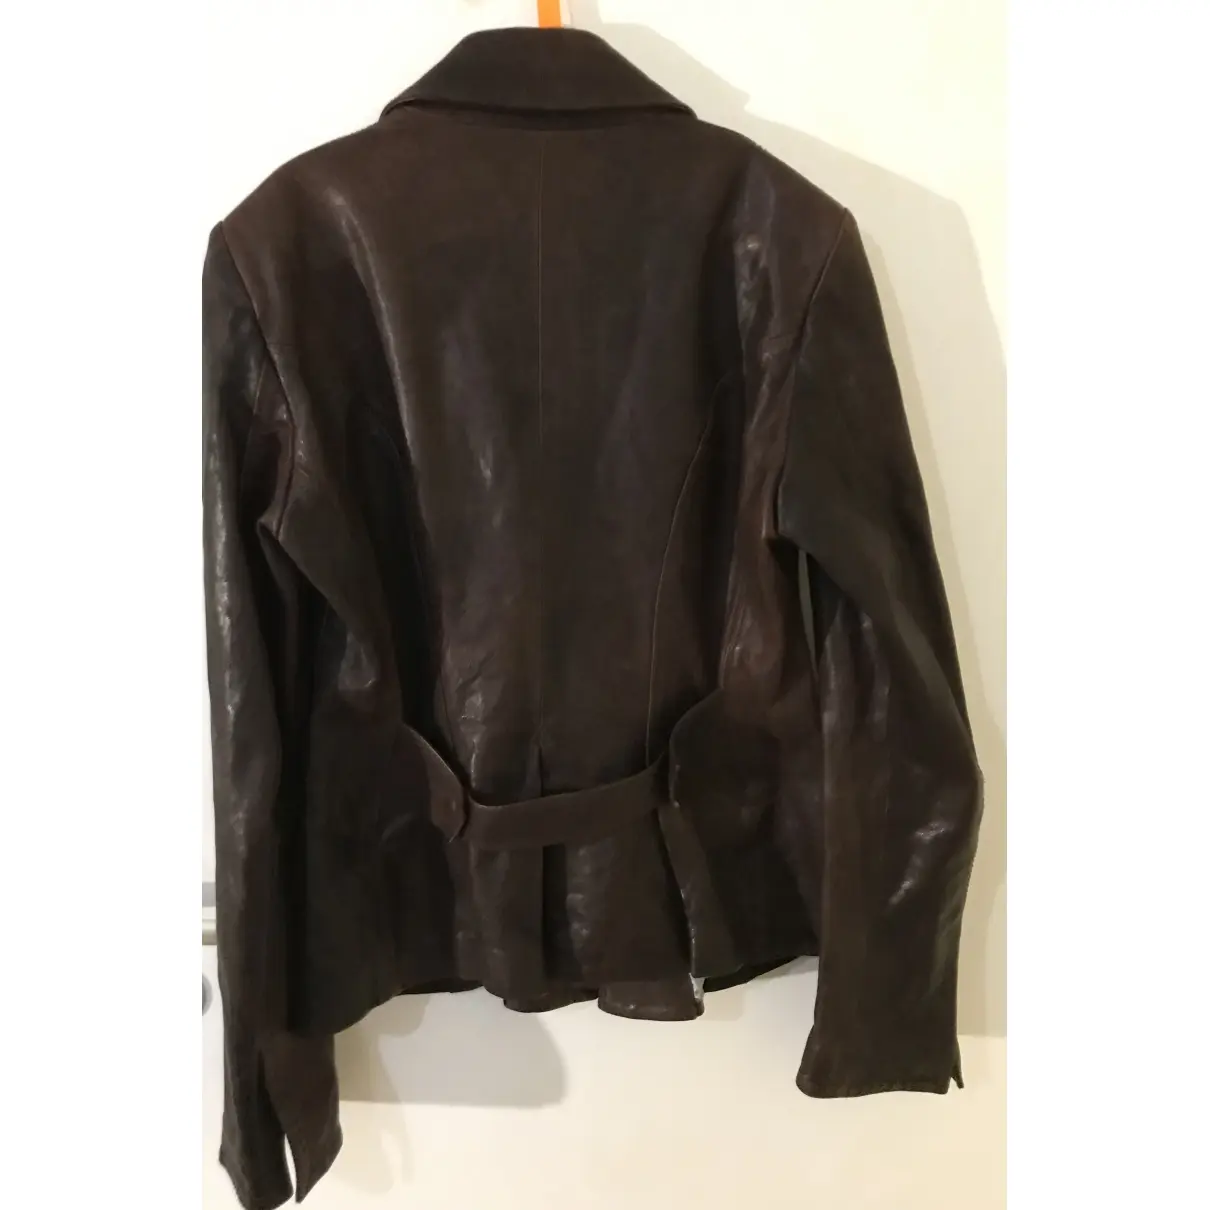 Buy Thes & Thes Leather jacket online